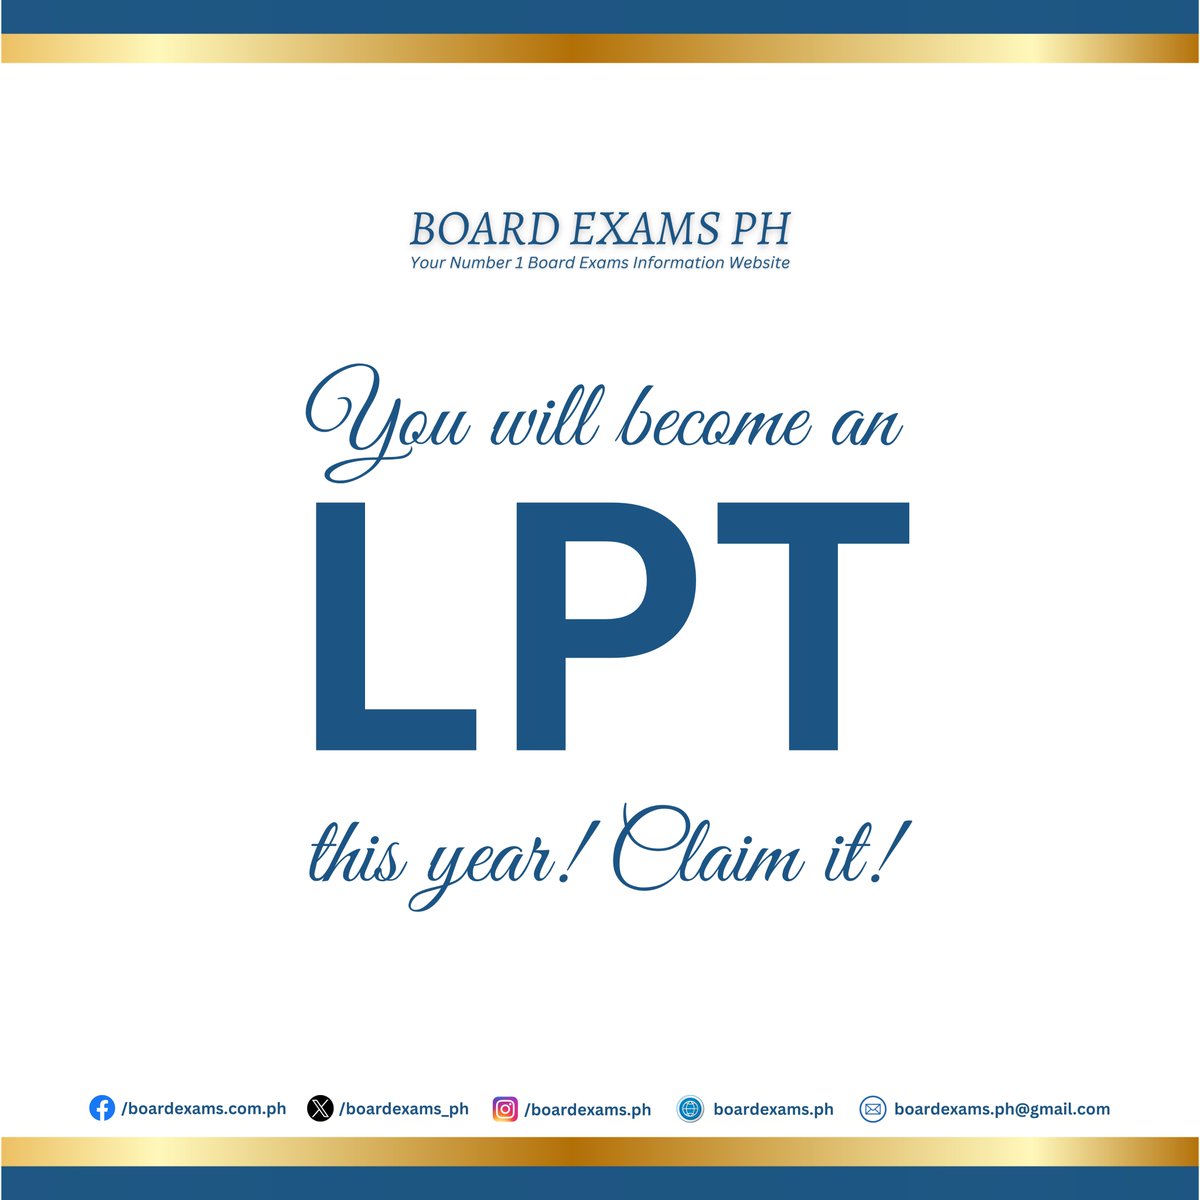 You will become an LPT this year! 🙏

➝ LET Results Here Soon:
✅ bit.ly/LETElementaryR…
✅ bit.ly/LETSecondaryRe…